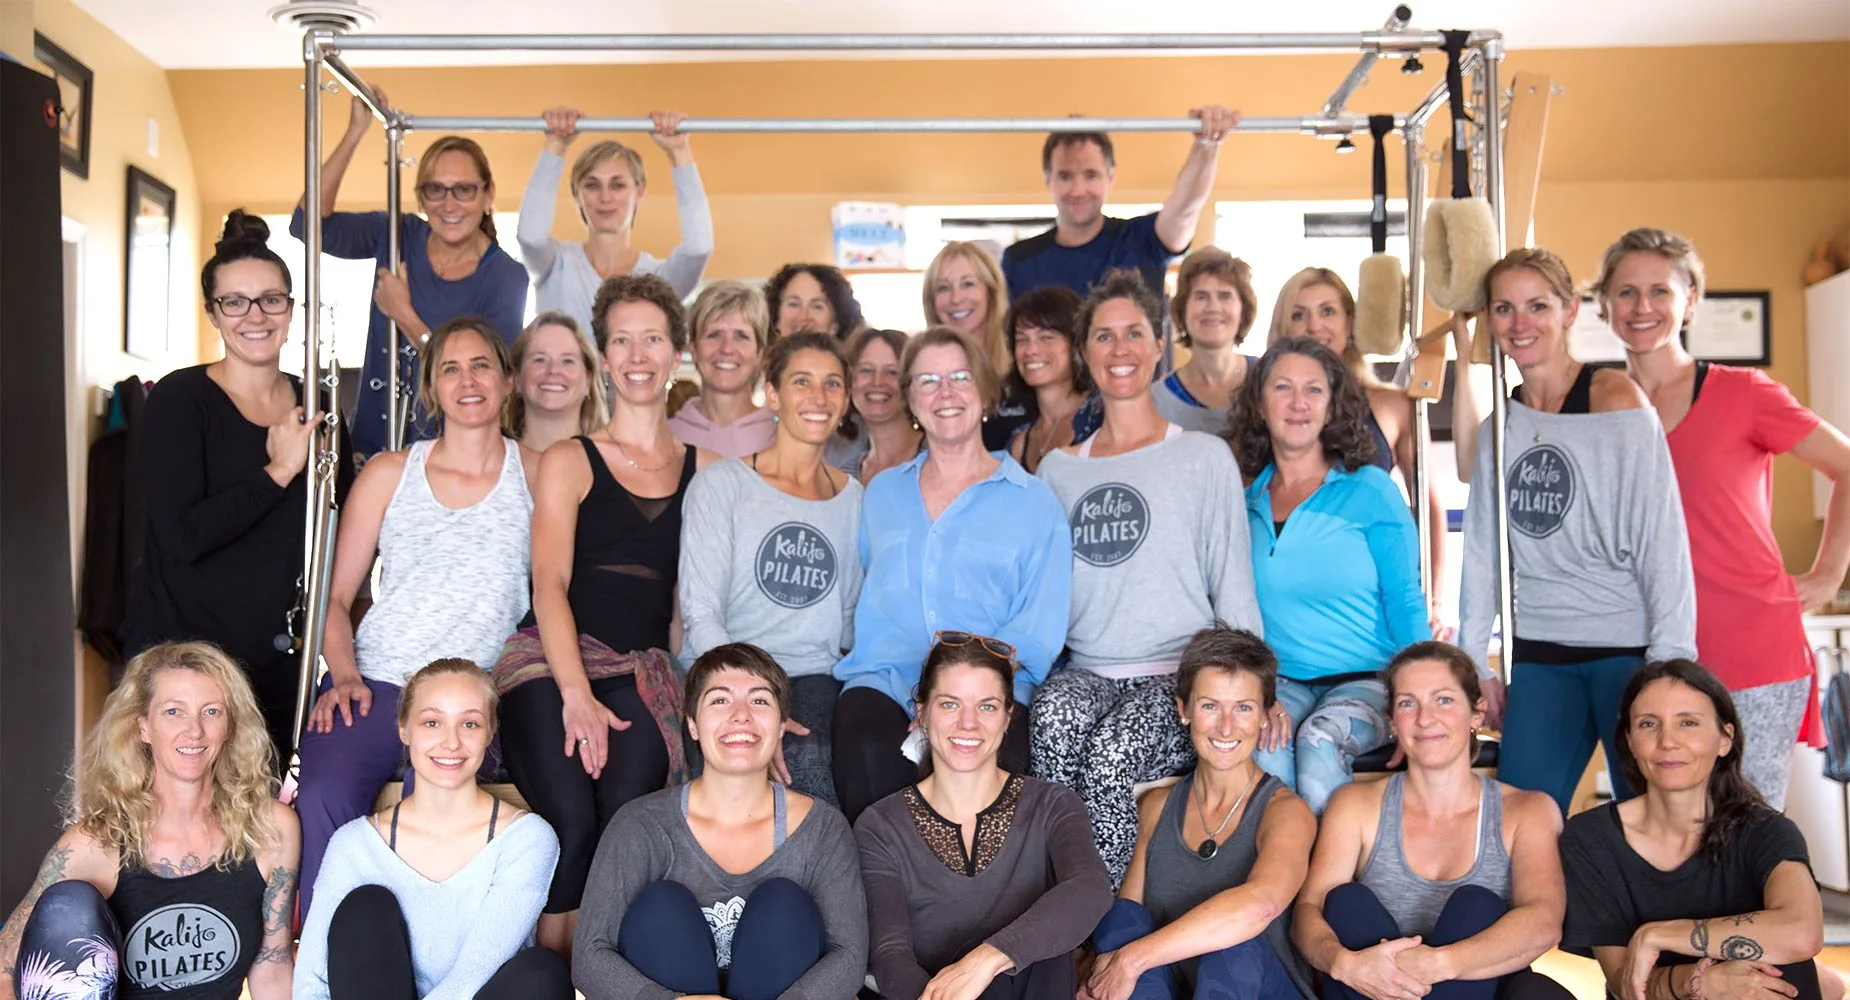 Become a Pilates Instructor - Certification from The Pilates Center